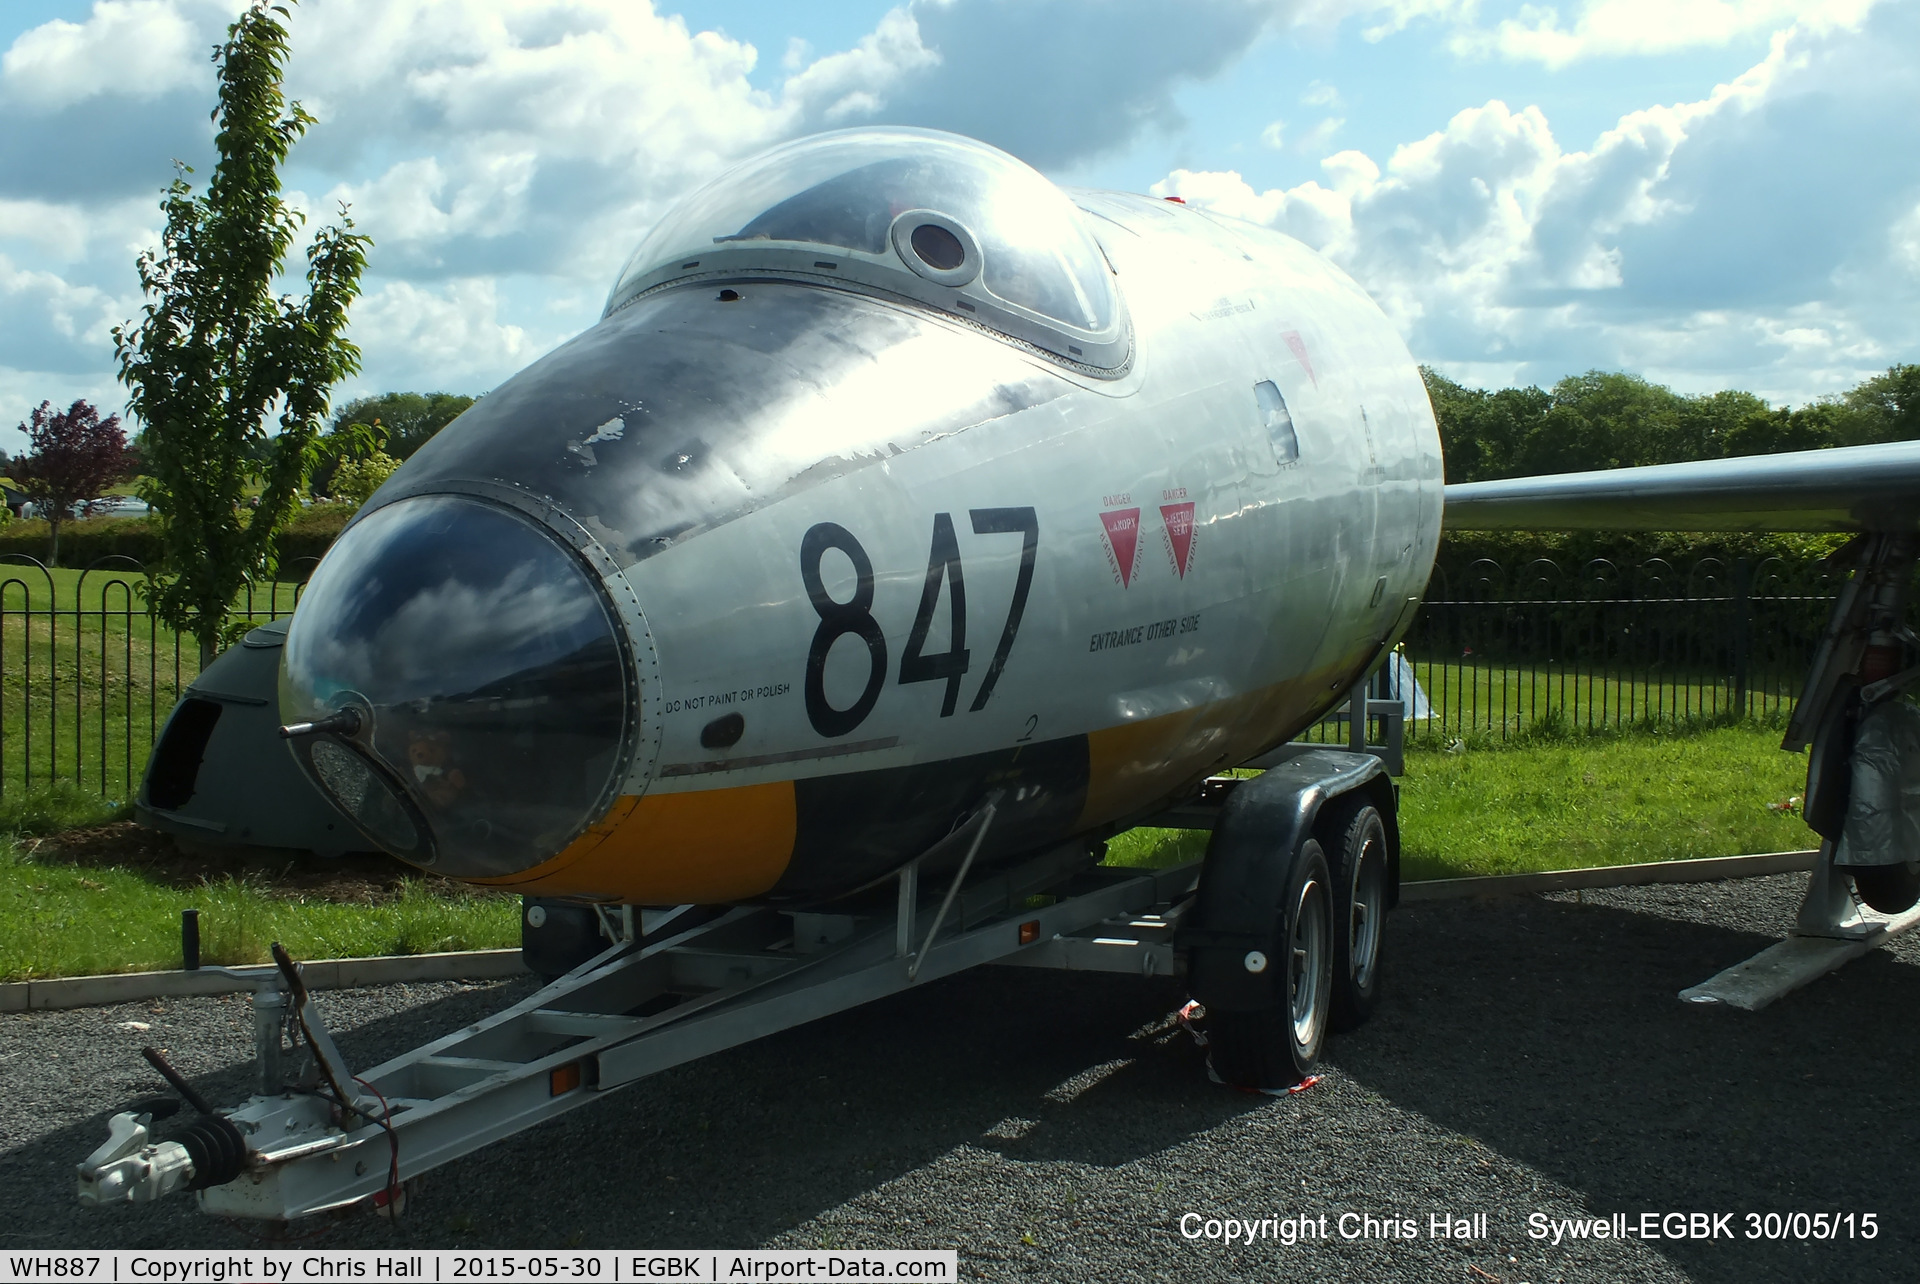 WH887, English Electric Canberra TT.18 C/N SH1644, at the Sywell Museum